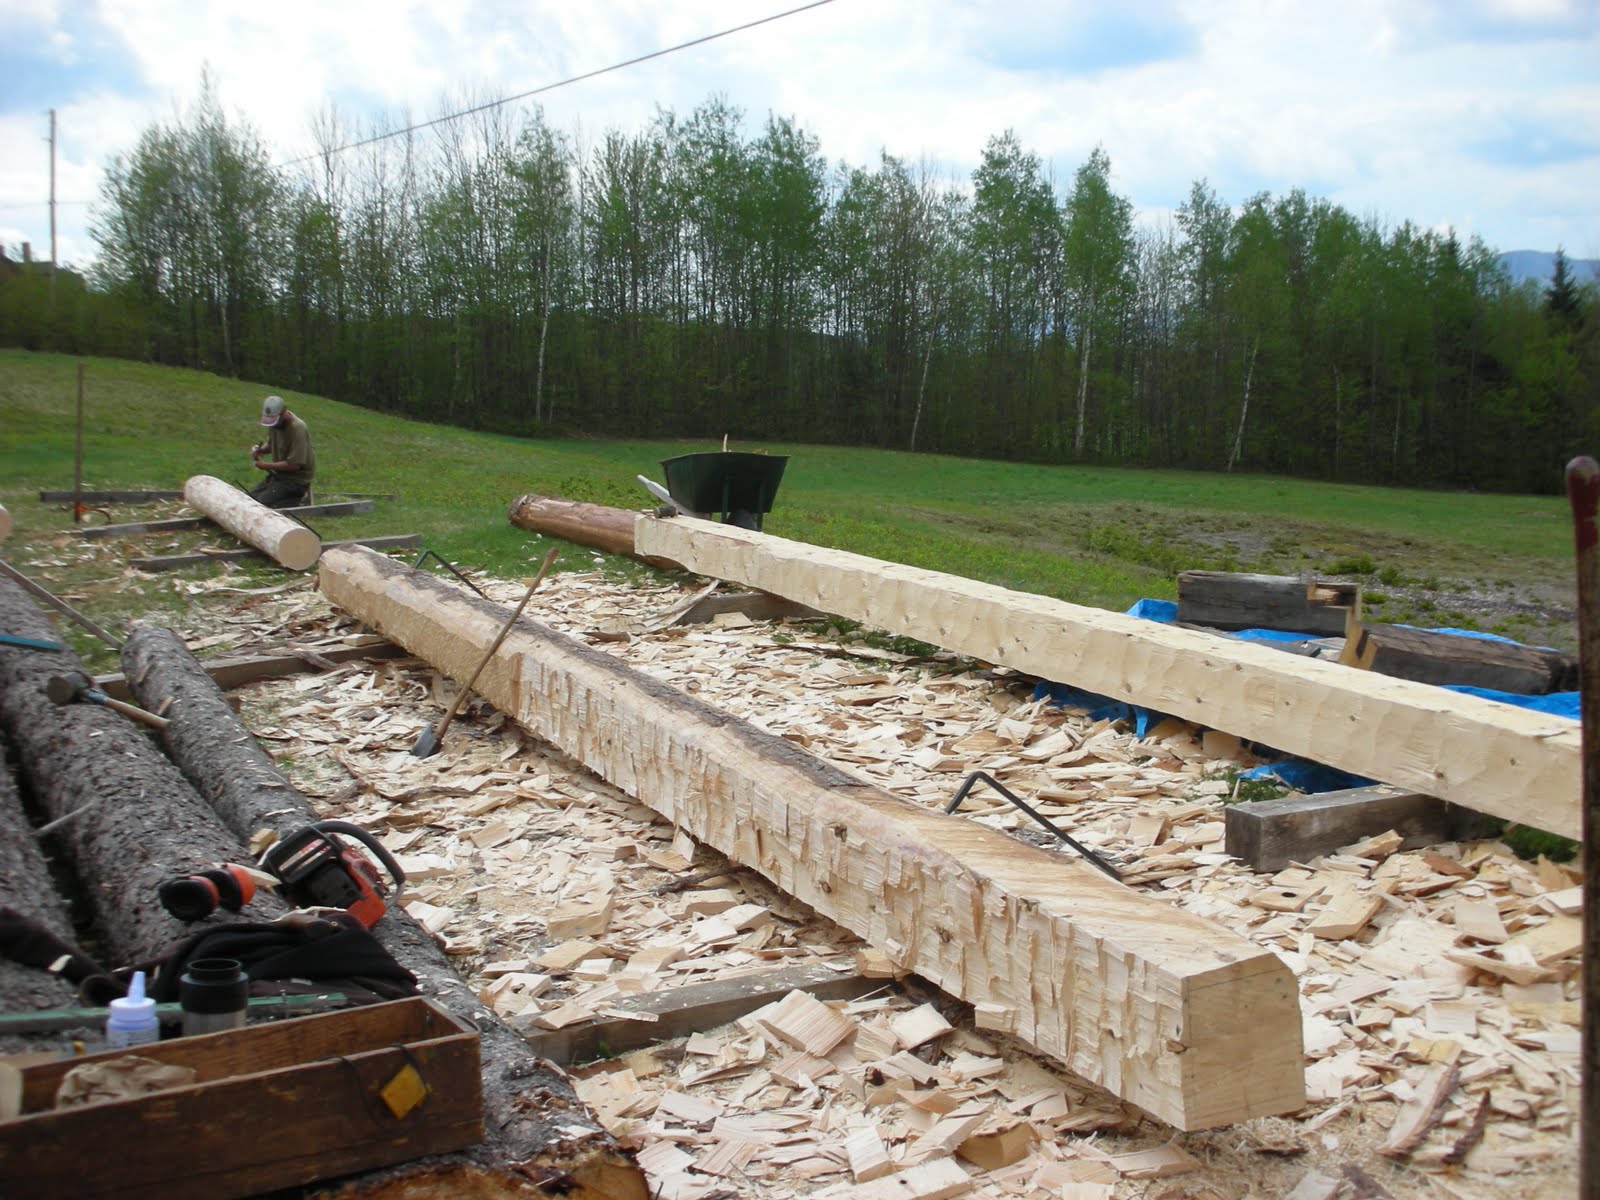 The finished sill timber is in the background with a new sill being roughed out in the foreground.  Michael begins laying out a post timber from a log.